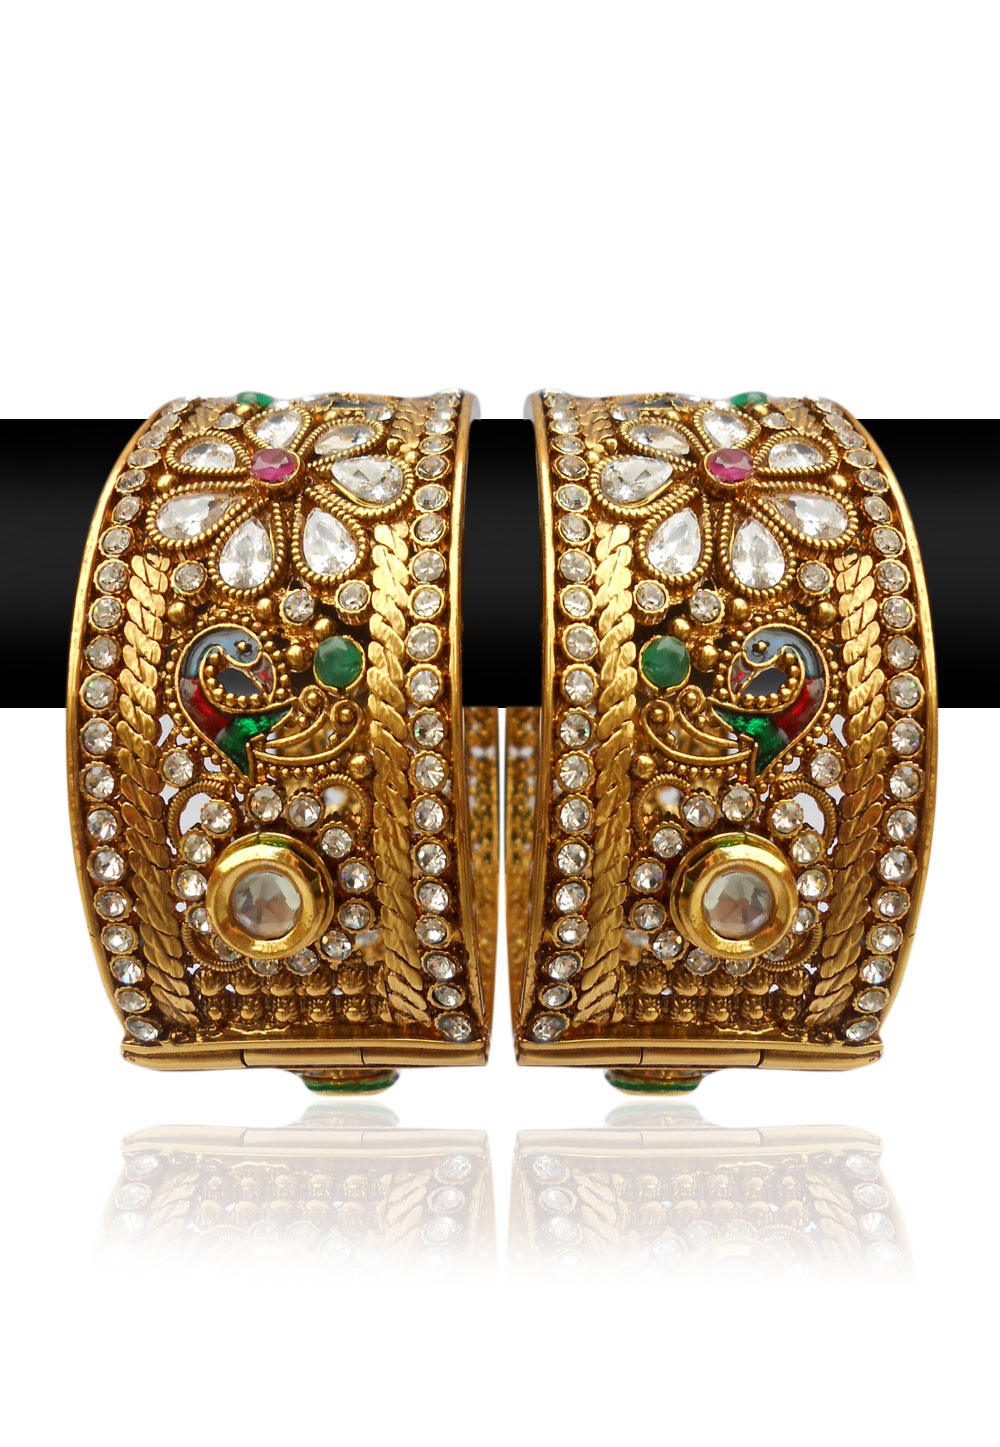 A Stone Studded Adjustable Bangle Set in Red, Green and White (Image: Utsavfashion.com)